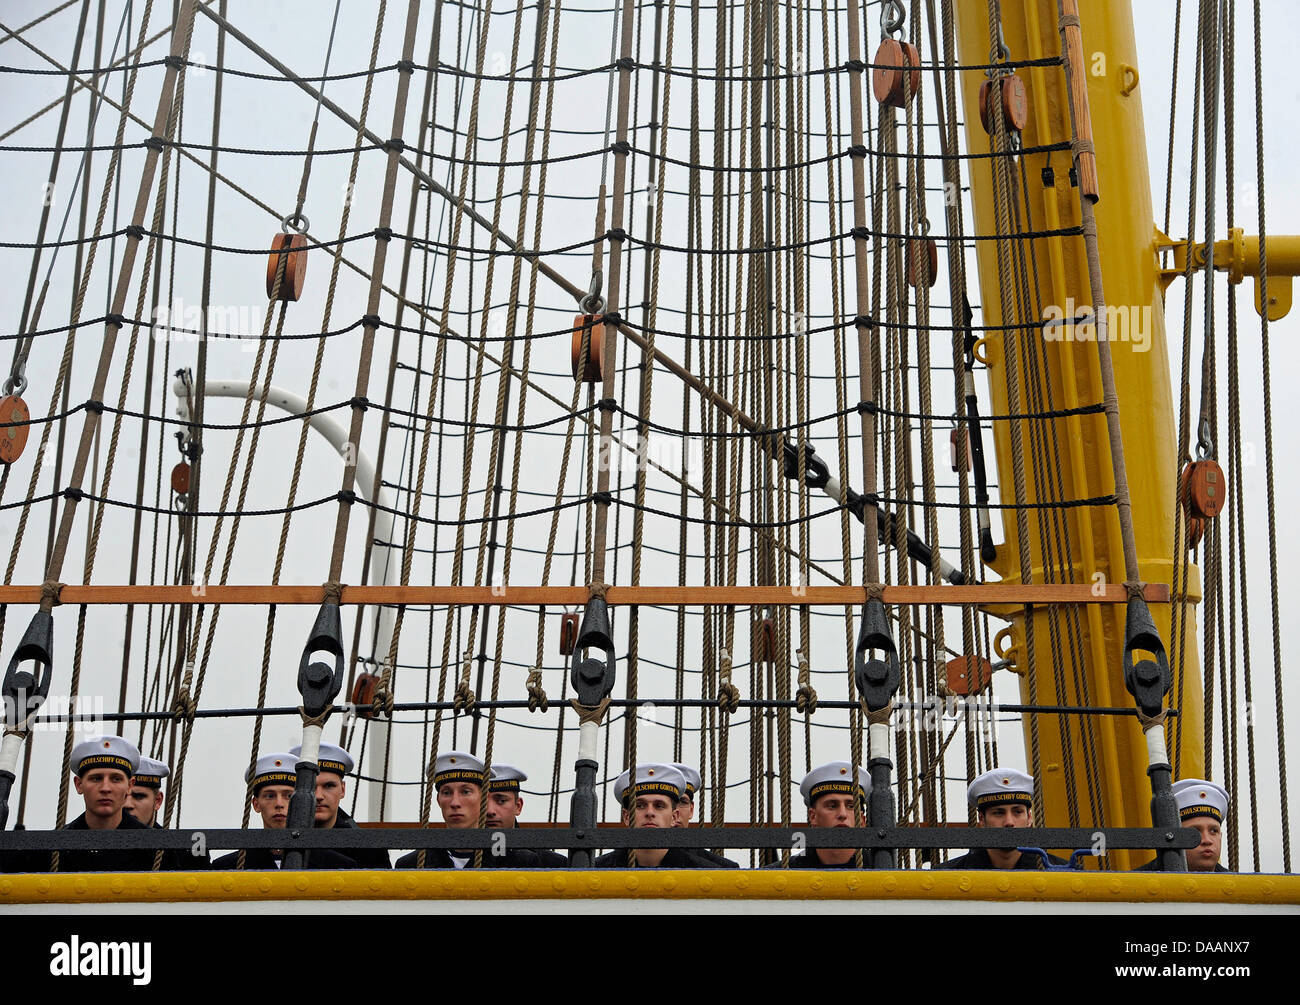 (file) - A dpa file picture dates 05 August 2010 shows sailors in the rigging of the German naval training ship 'Gorch Fock' in Hamburg, Germany. After a female officer cadet fell to her death from the rigging of the ship's three masts in November 2010, the German Navy now investigates on suspicion of mutiny. According to a spokesperson of the German Bundestag, official investigati Stock Photo